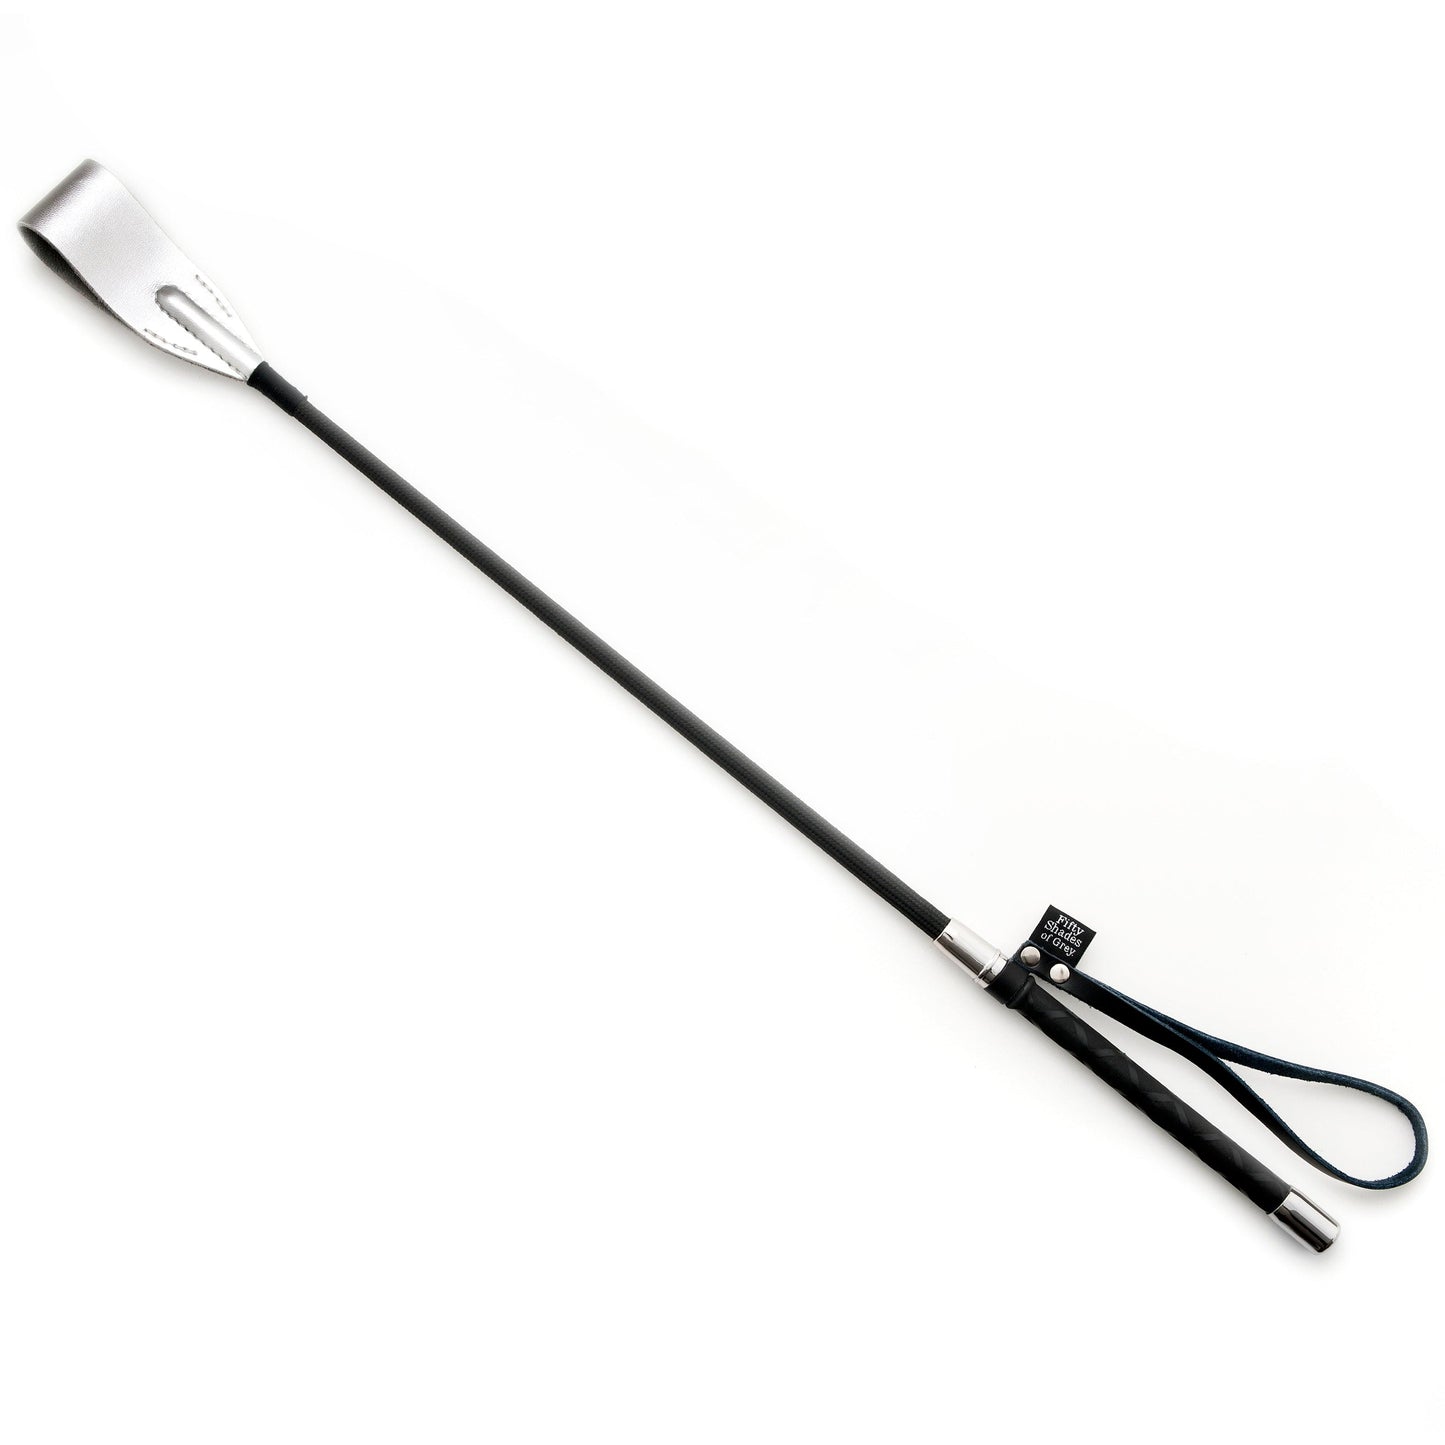 Fifty Shades of Grey Sweet Sting Riding Crop - My Sex Toy Hub